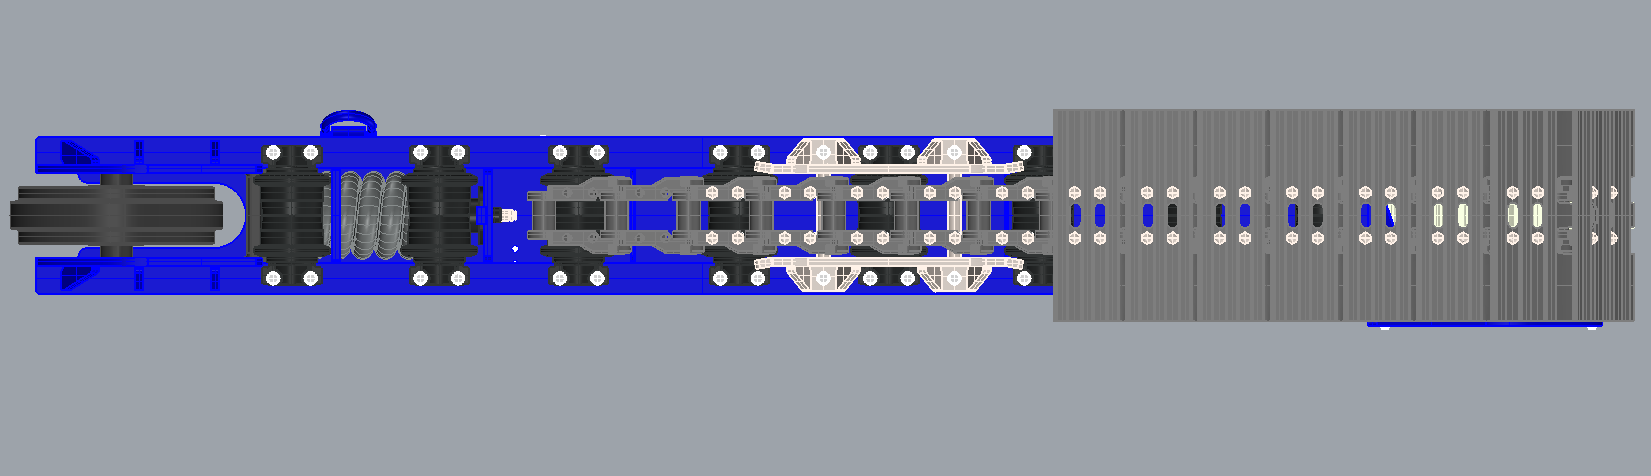 VemaTRACK - Mounting chains in the correct direction